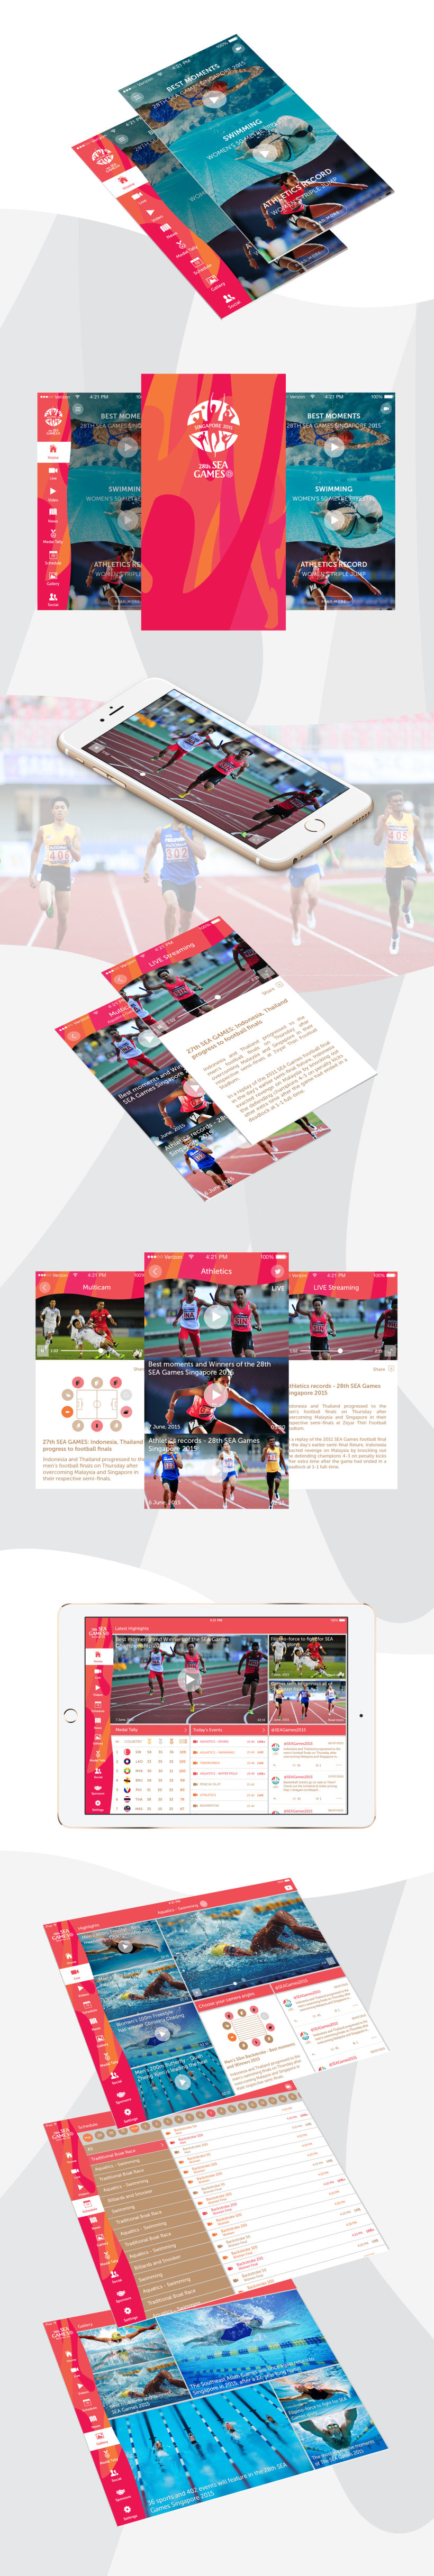 28th Southeast Asian Games 1